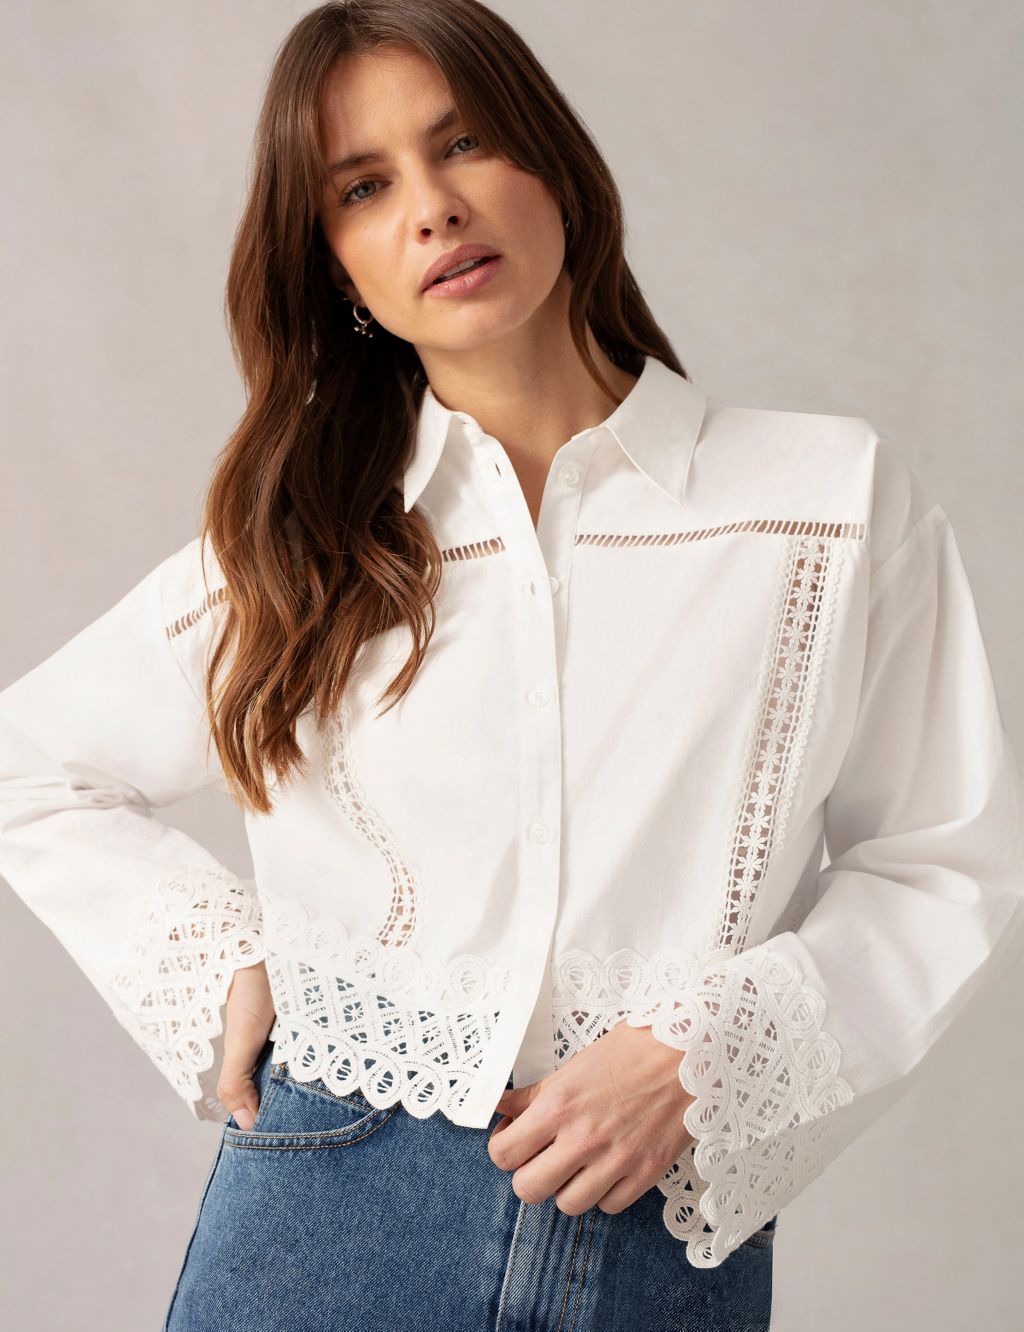 Pure Cotton Embroidered Collared Shirt